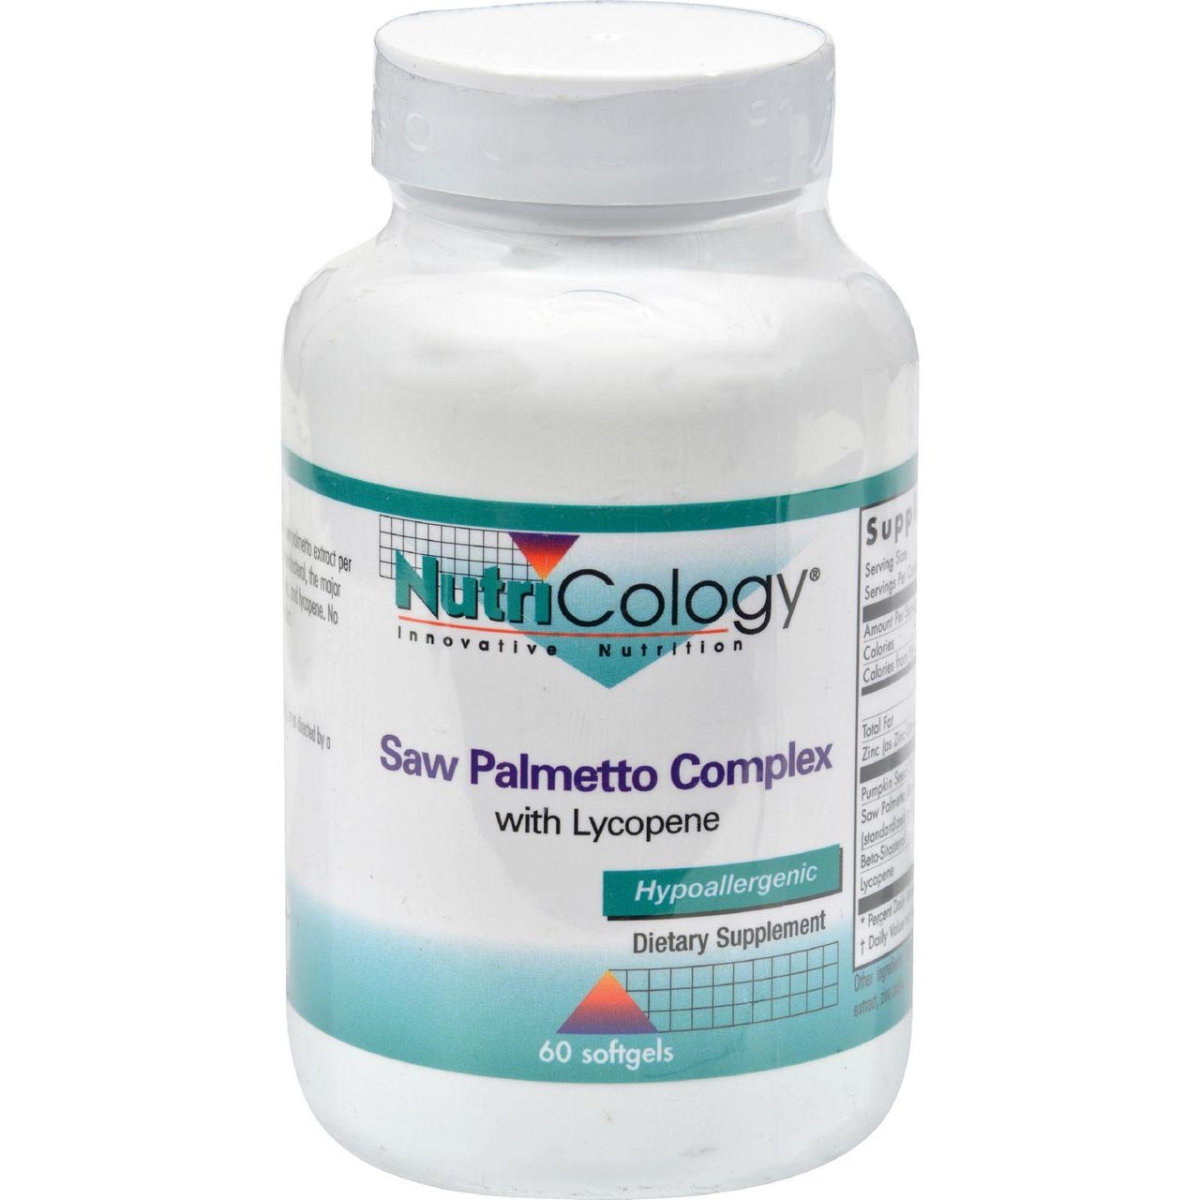 Hg0524314 Saw Palmetto Complex With Lycopene - 60 Softgels